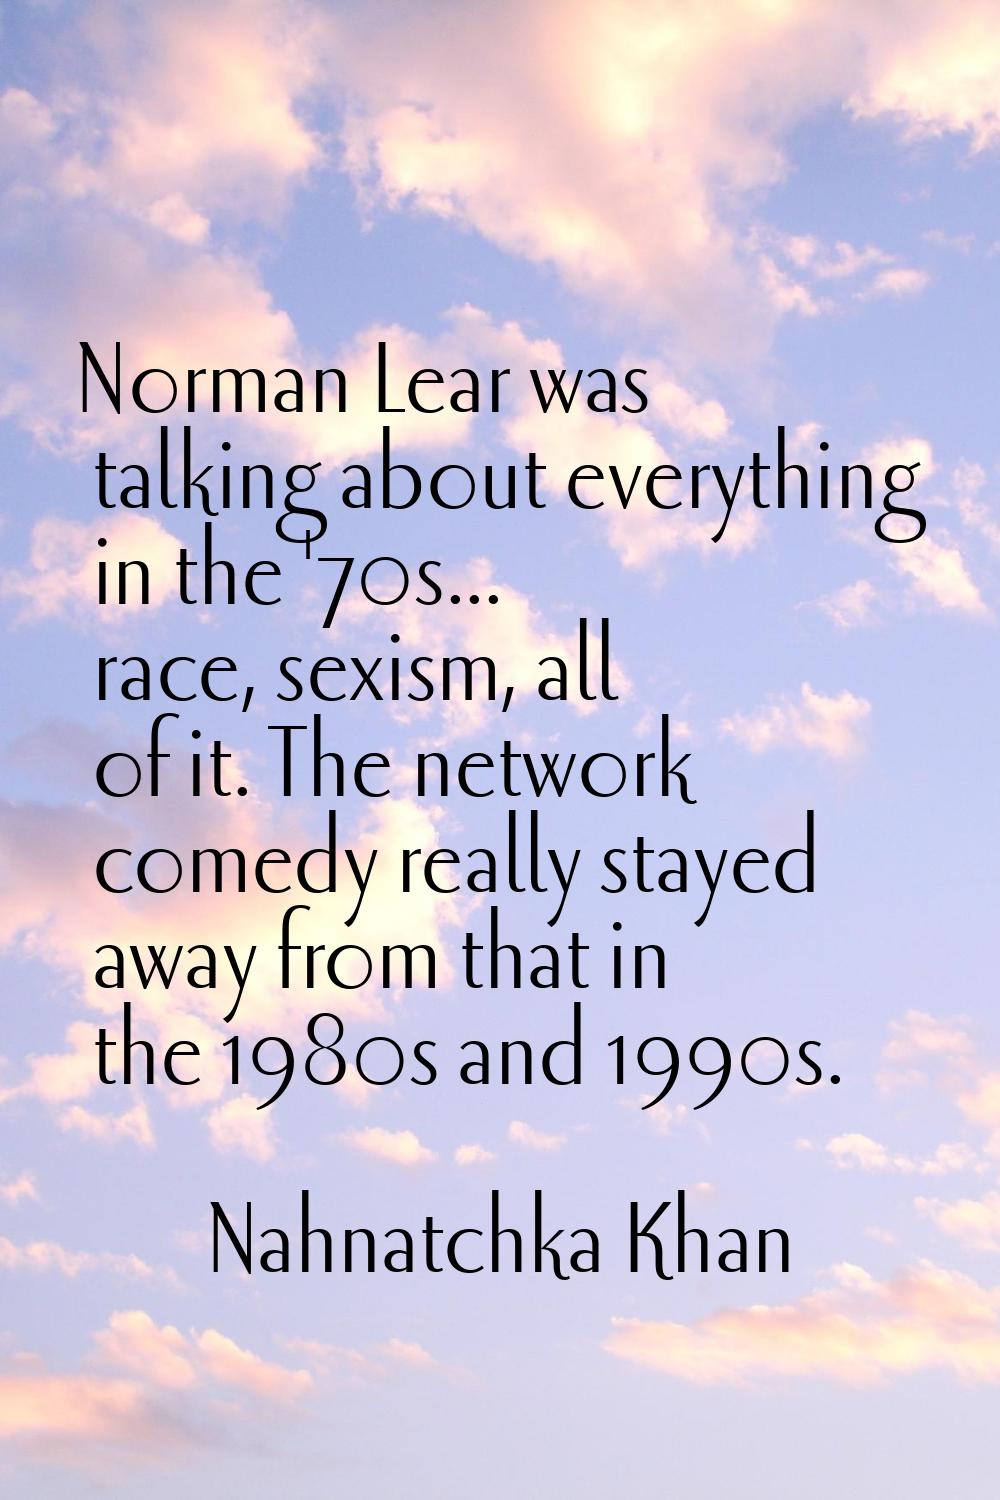 Norman Lear was talking about everything in the '70s... race, sexism, all of it. The network comedy